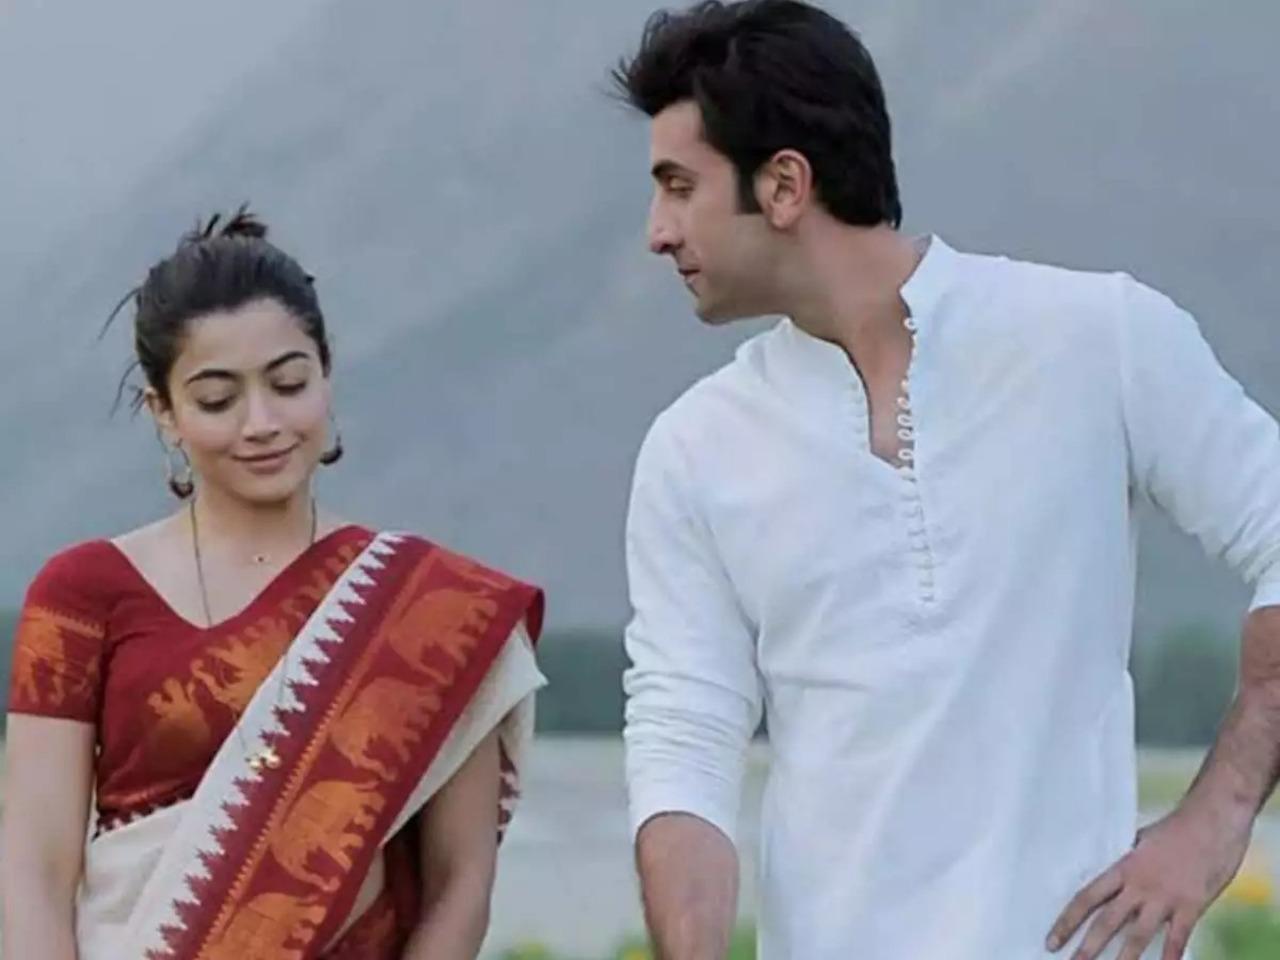 Rashmika was last seen in the much debated film 'Animal'. She played the role of Geetanjali in the Hindi film that stars Ranbir Kapoor